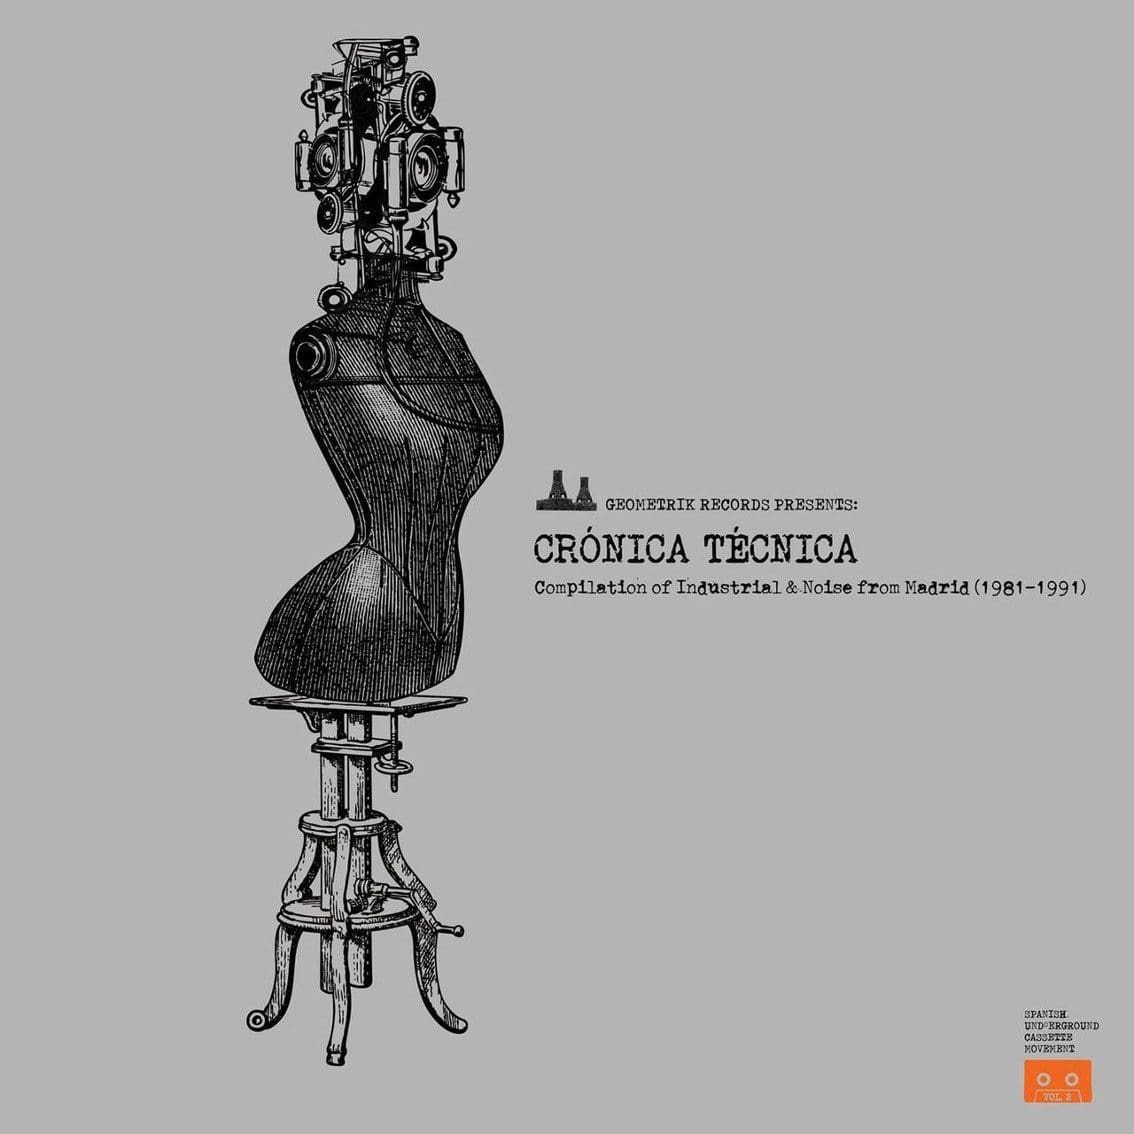 Spanish electronic scene from the eighties compiled on 'Cronica Tecnica: compilation of industrial and noise from Madrid 1981-1991' 2LP vinyl